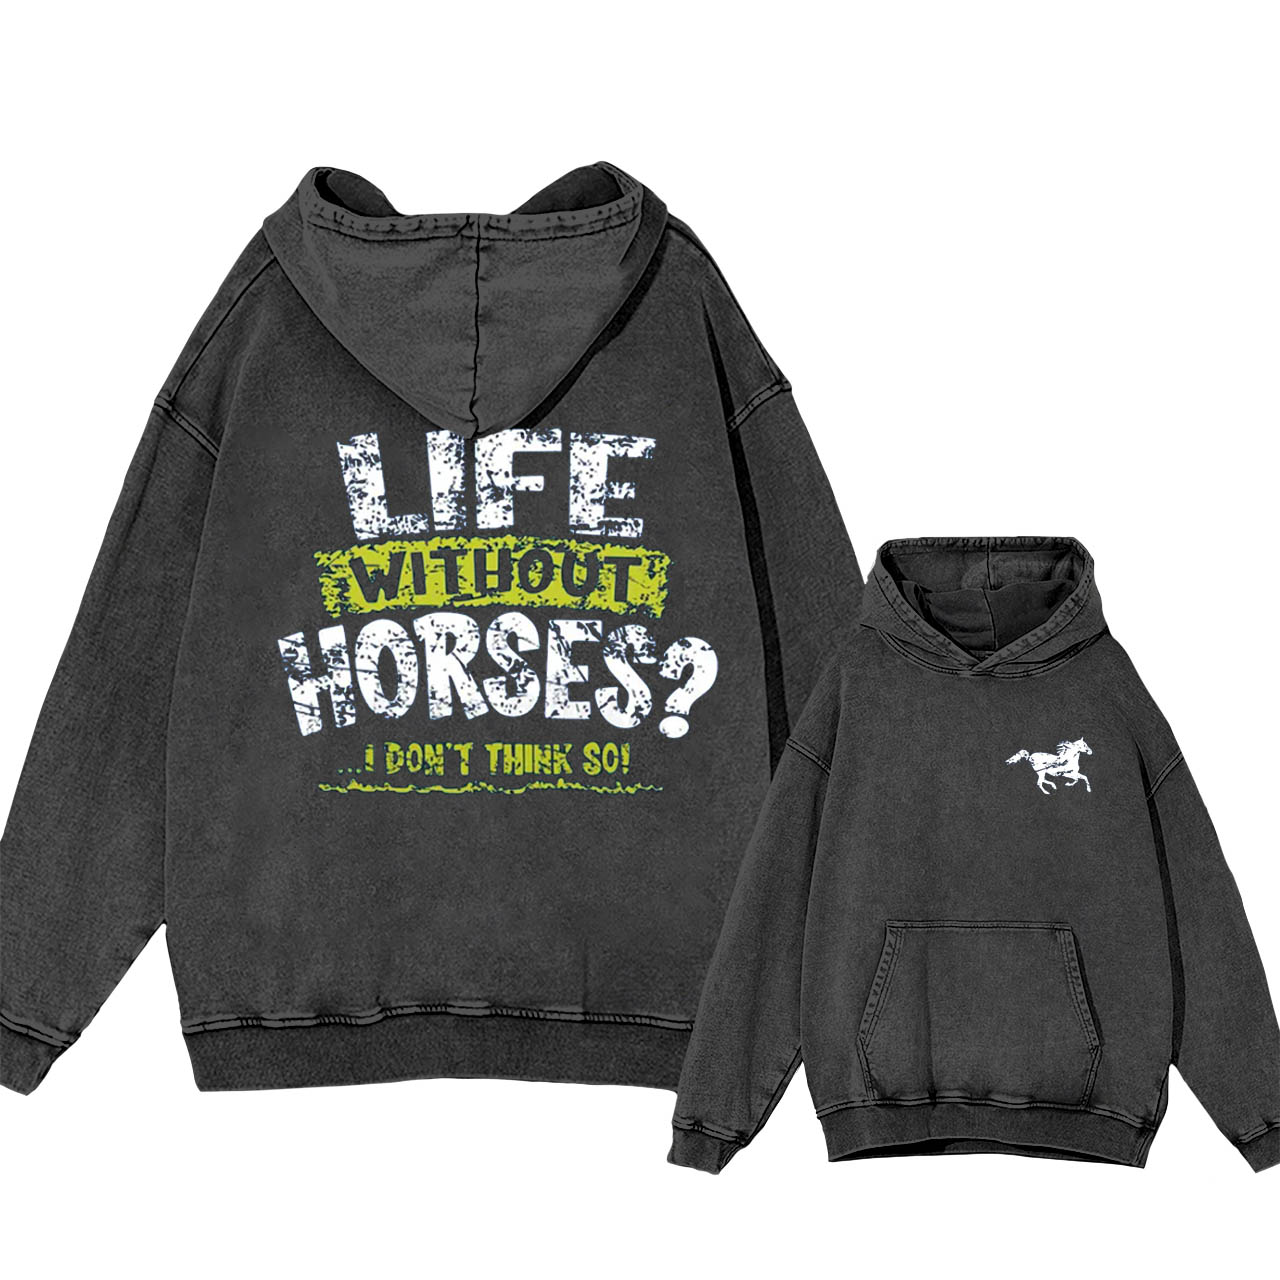 Life Without Horses?I Dont Think So! Garment-Dye Hoodies